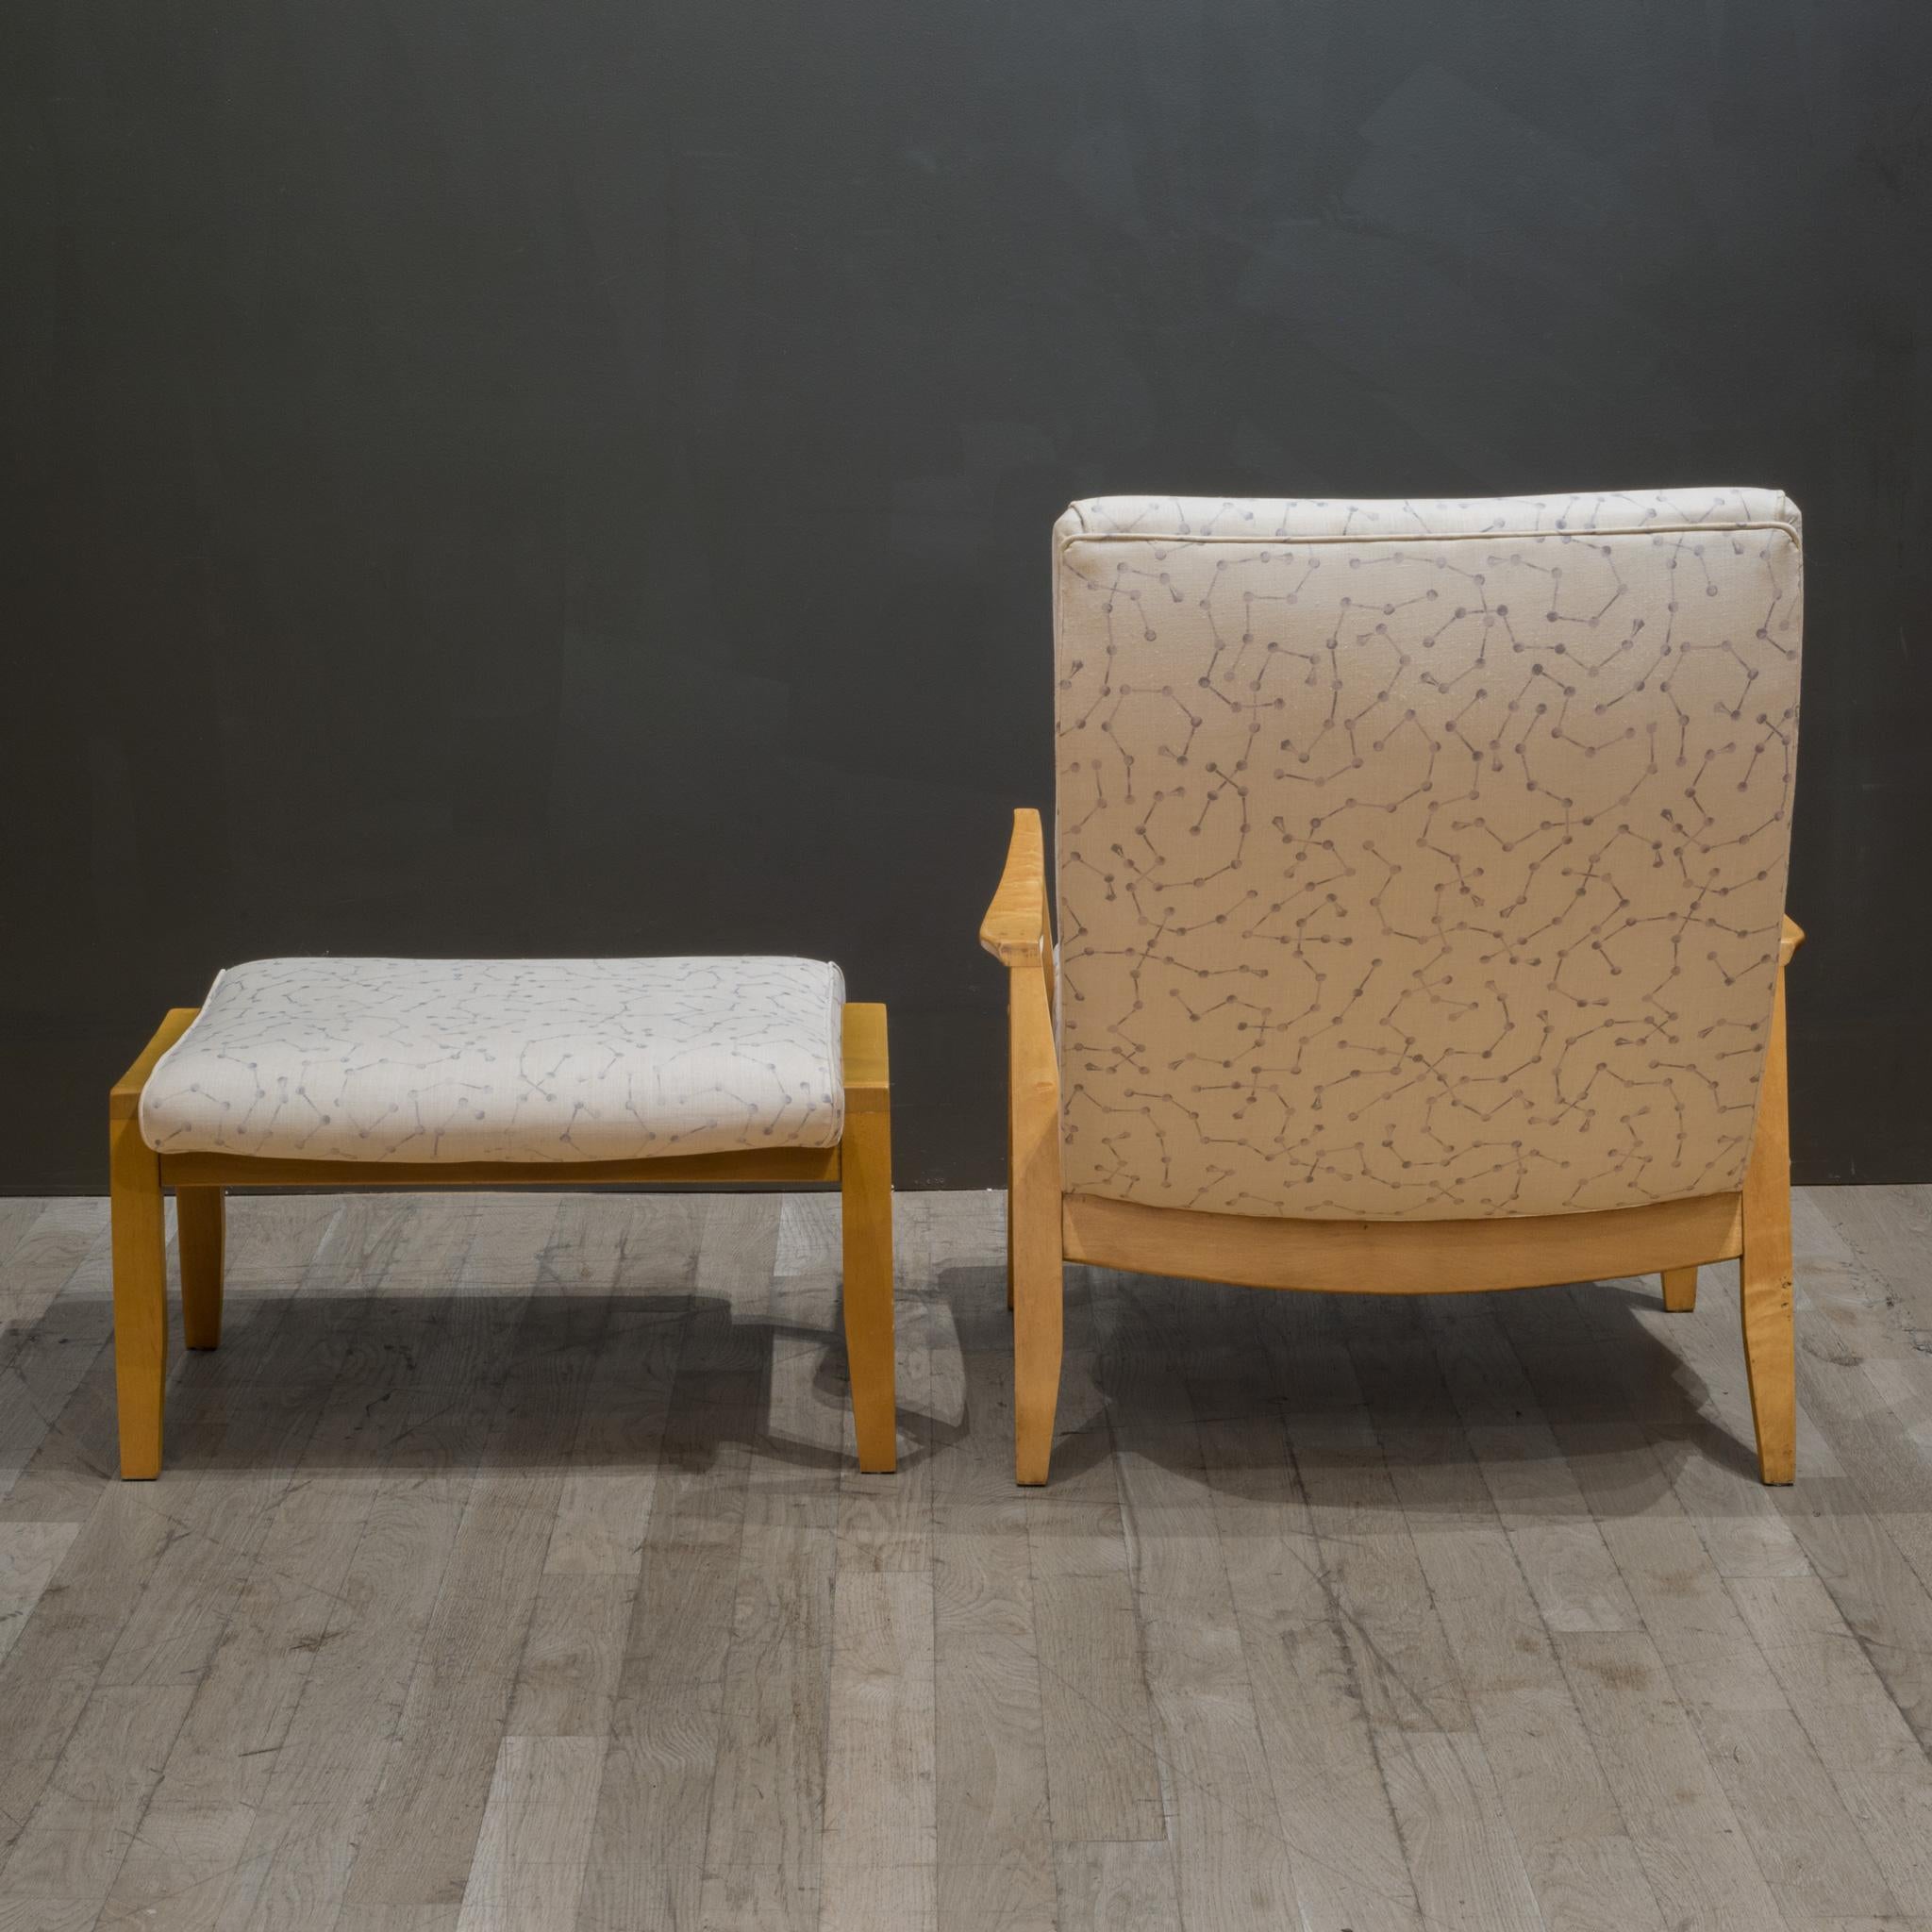 20th Century Mid-Century Milo Baughman Scoop Lounge Chair and Ottoman, C.1950-1960 For Sale